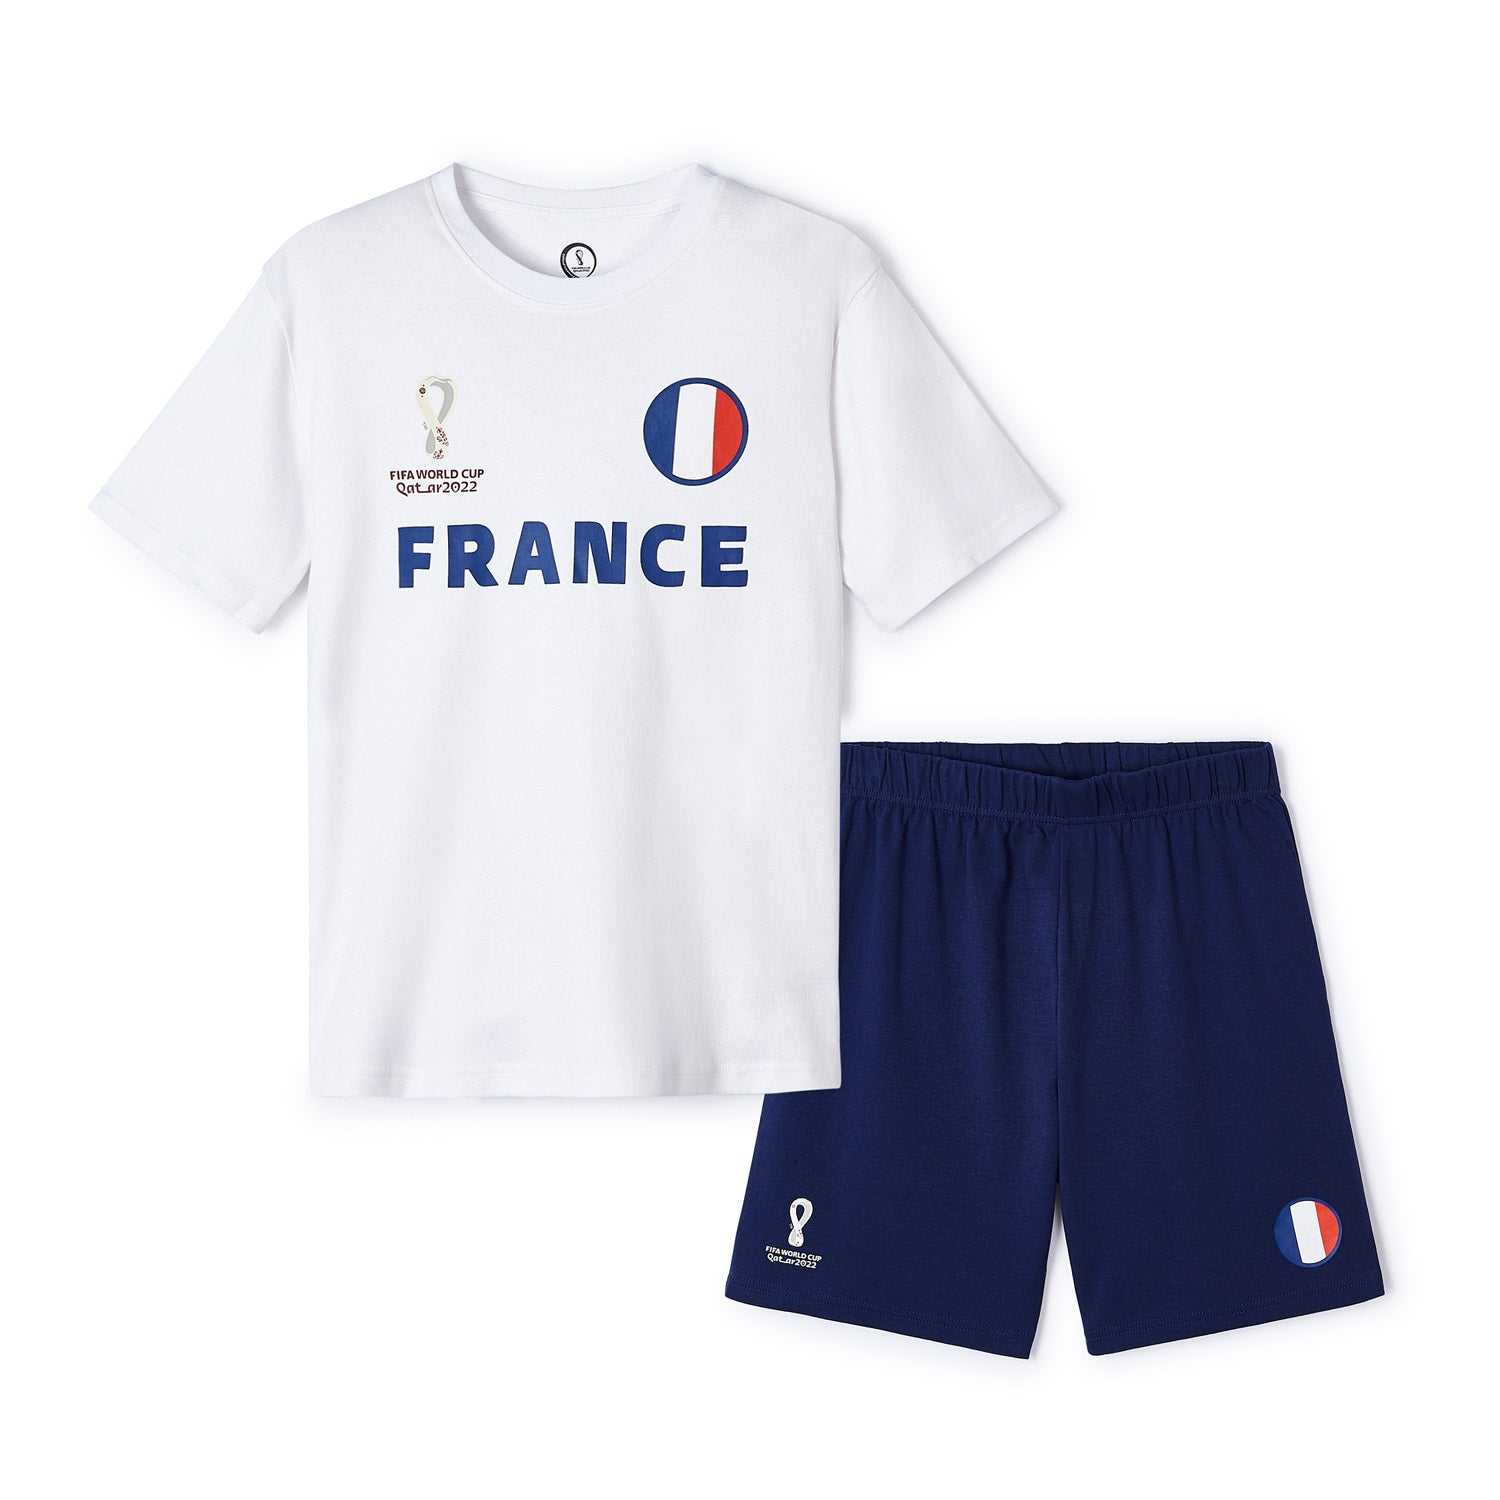 2022 World Cup France White T-Shirt - Youth